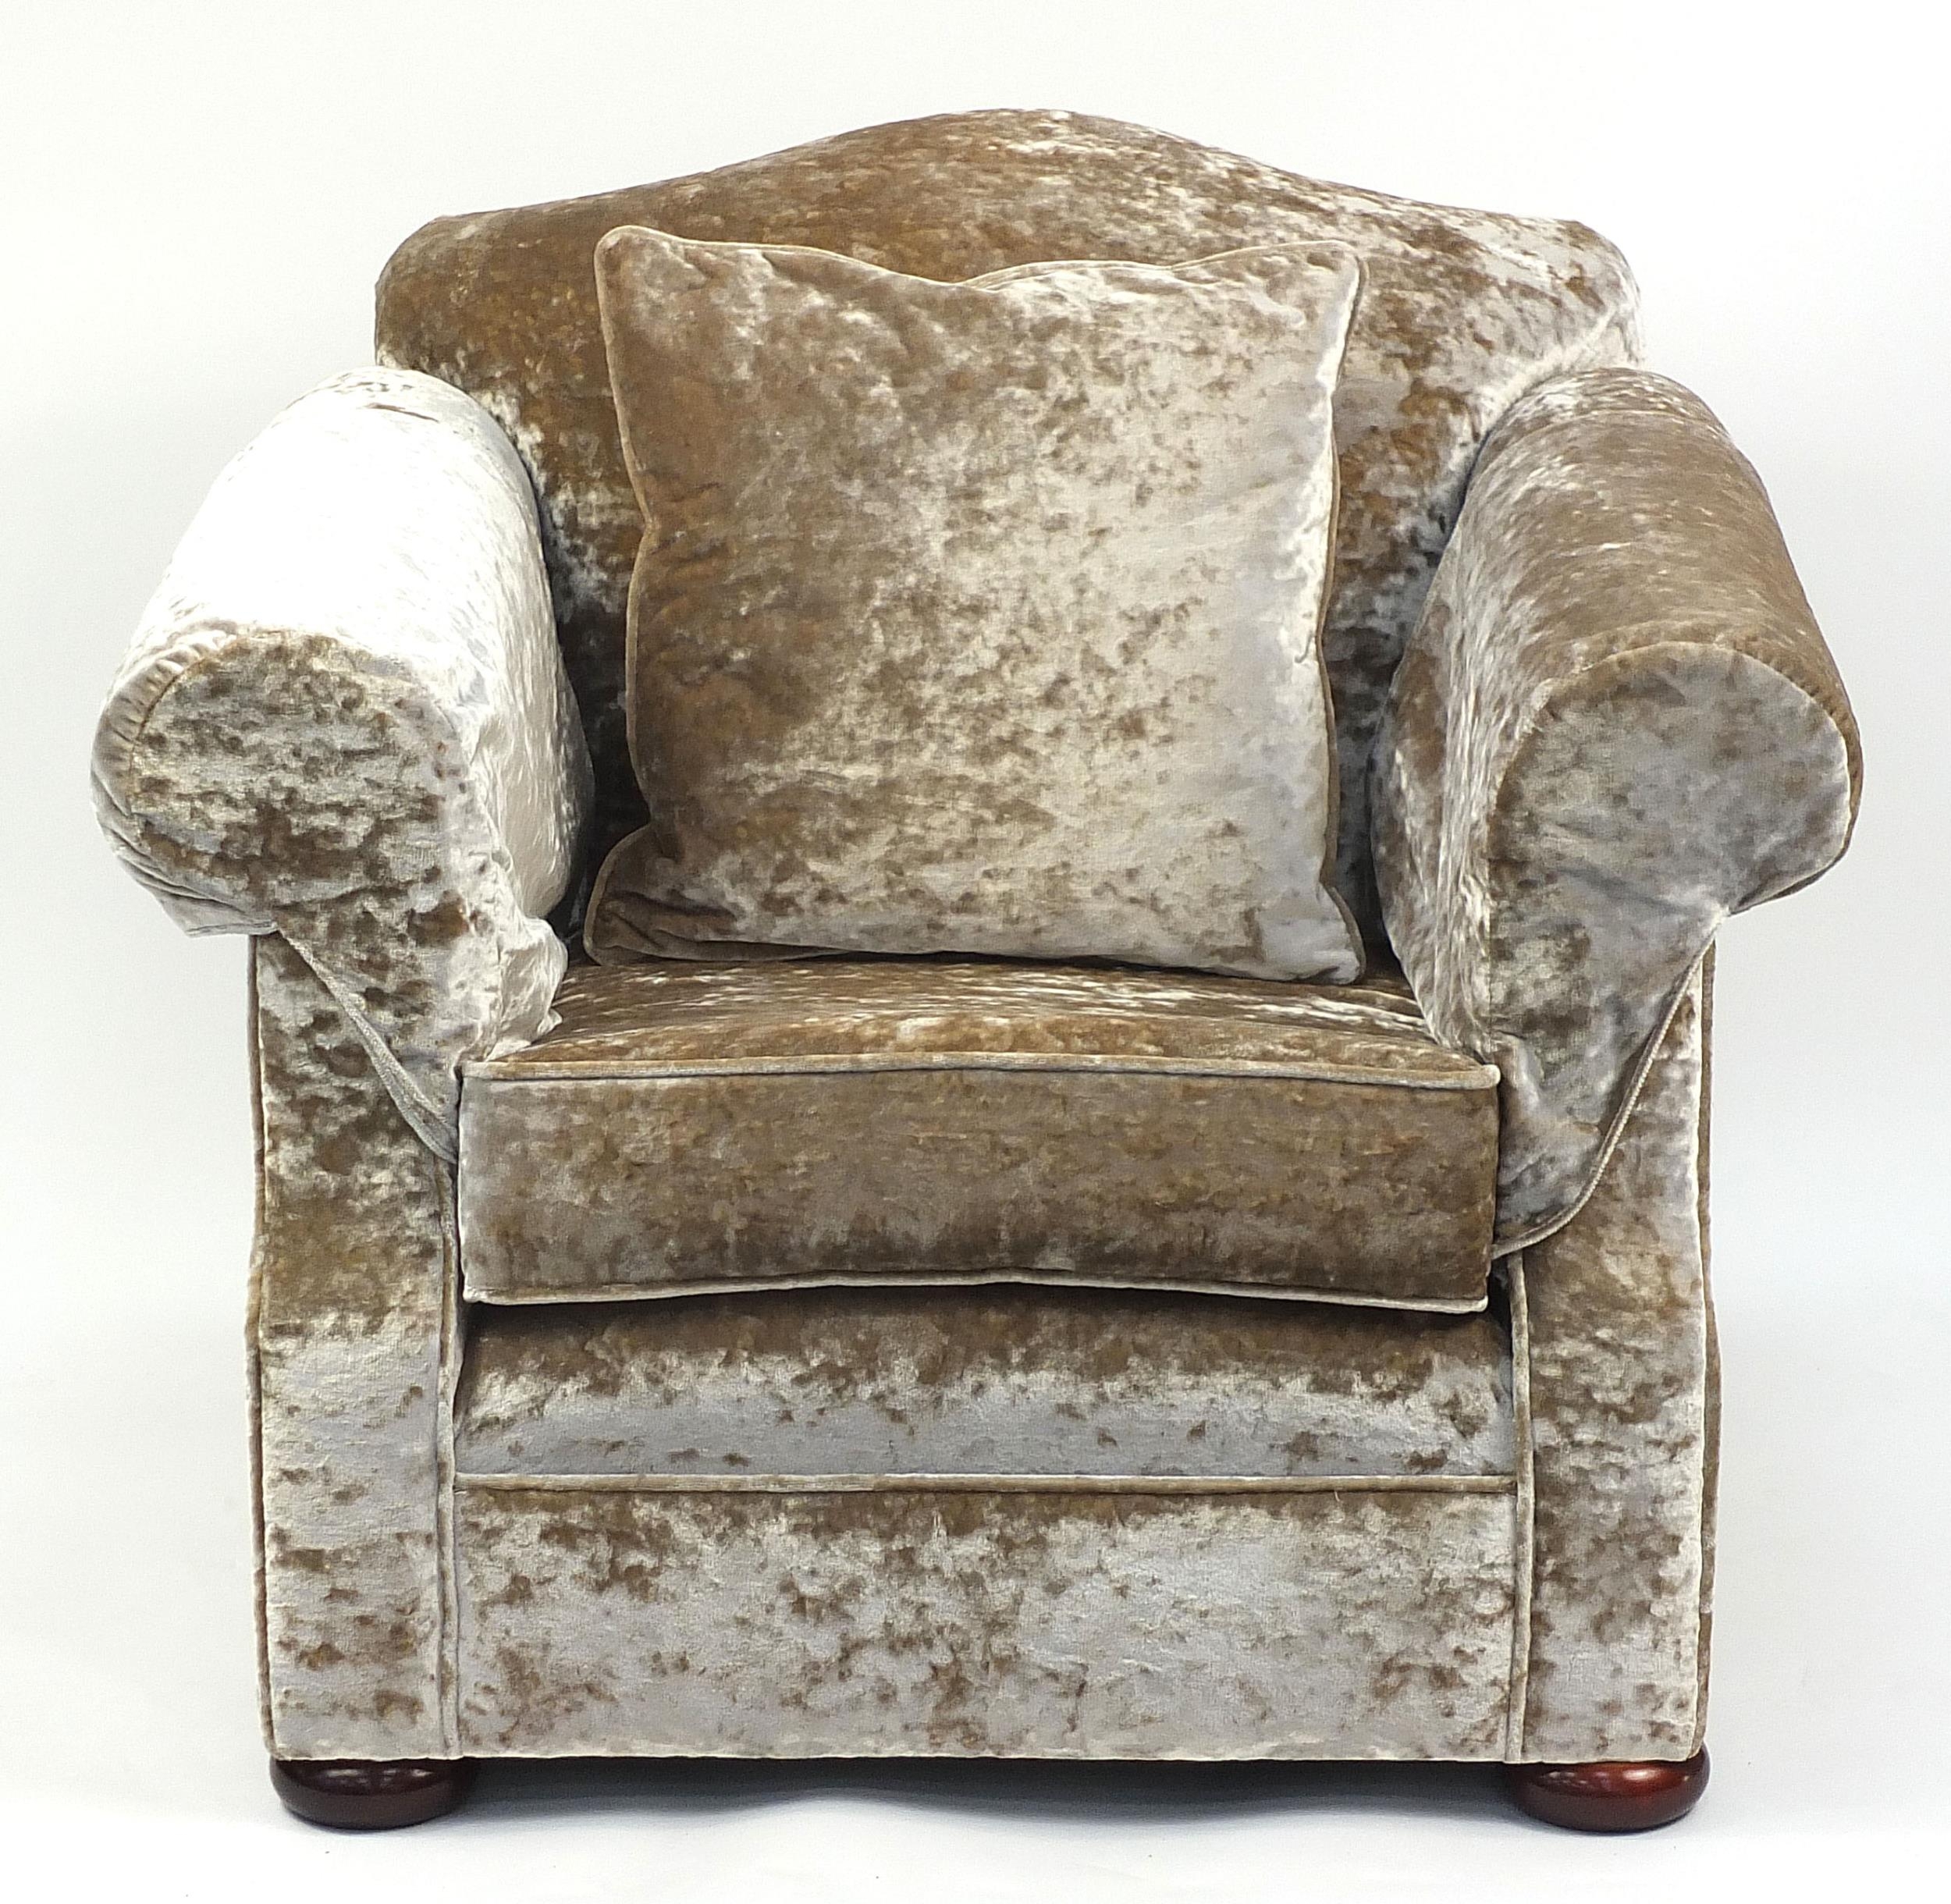 Pair of lounge chairs upholstered in grey crushed velvet, 85cm H x 100cm W x 100cm D - Image 2 of 7